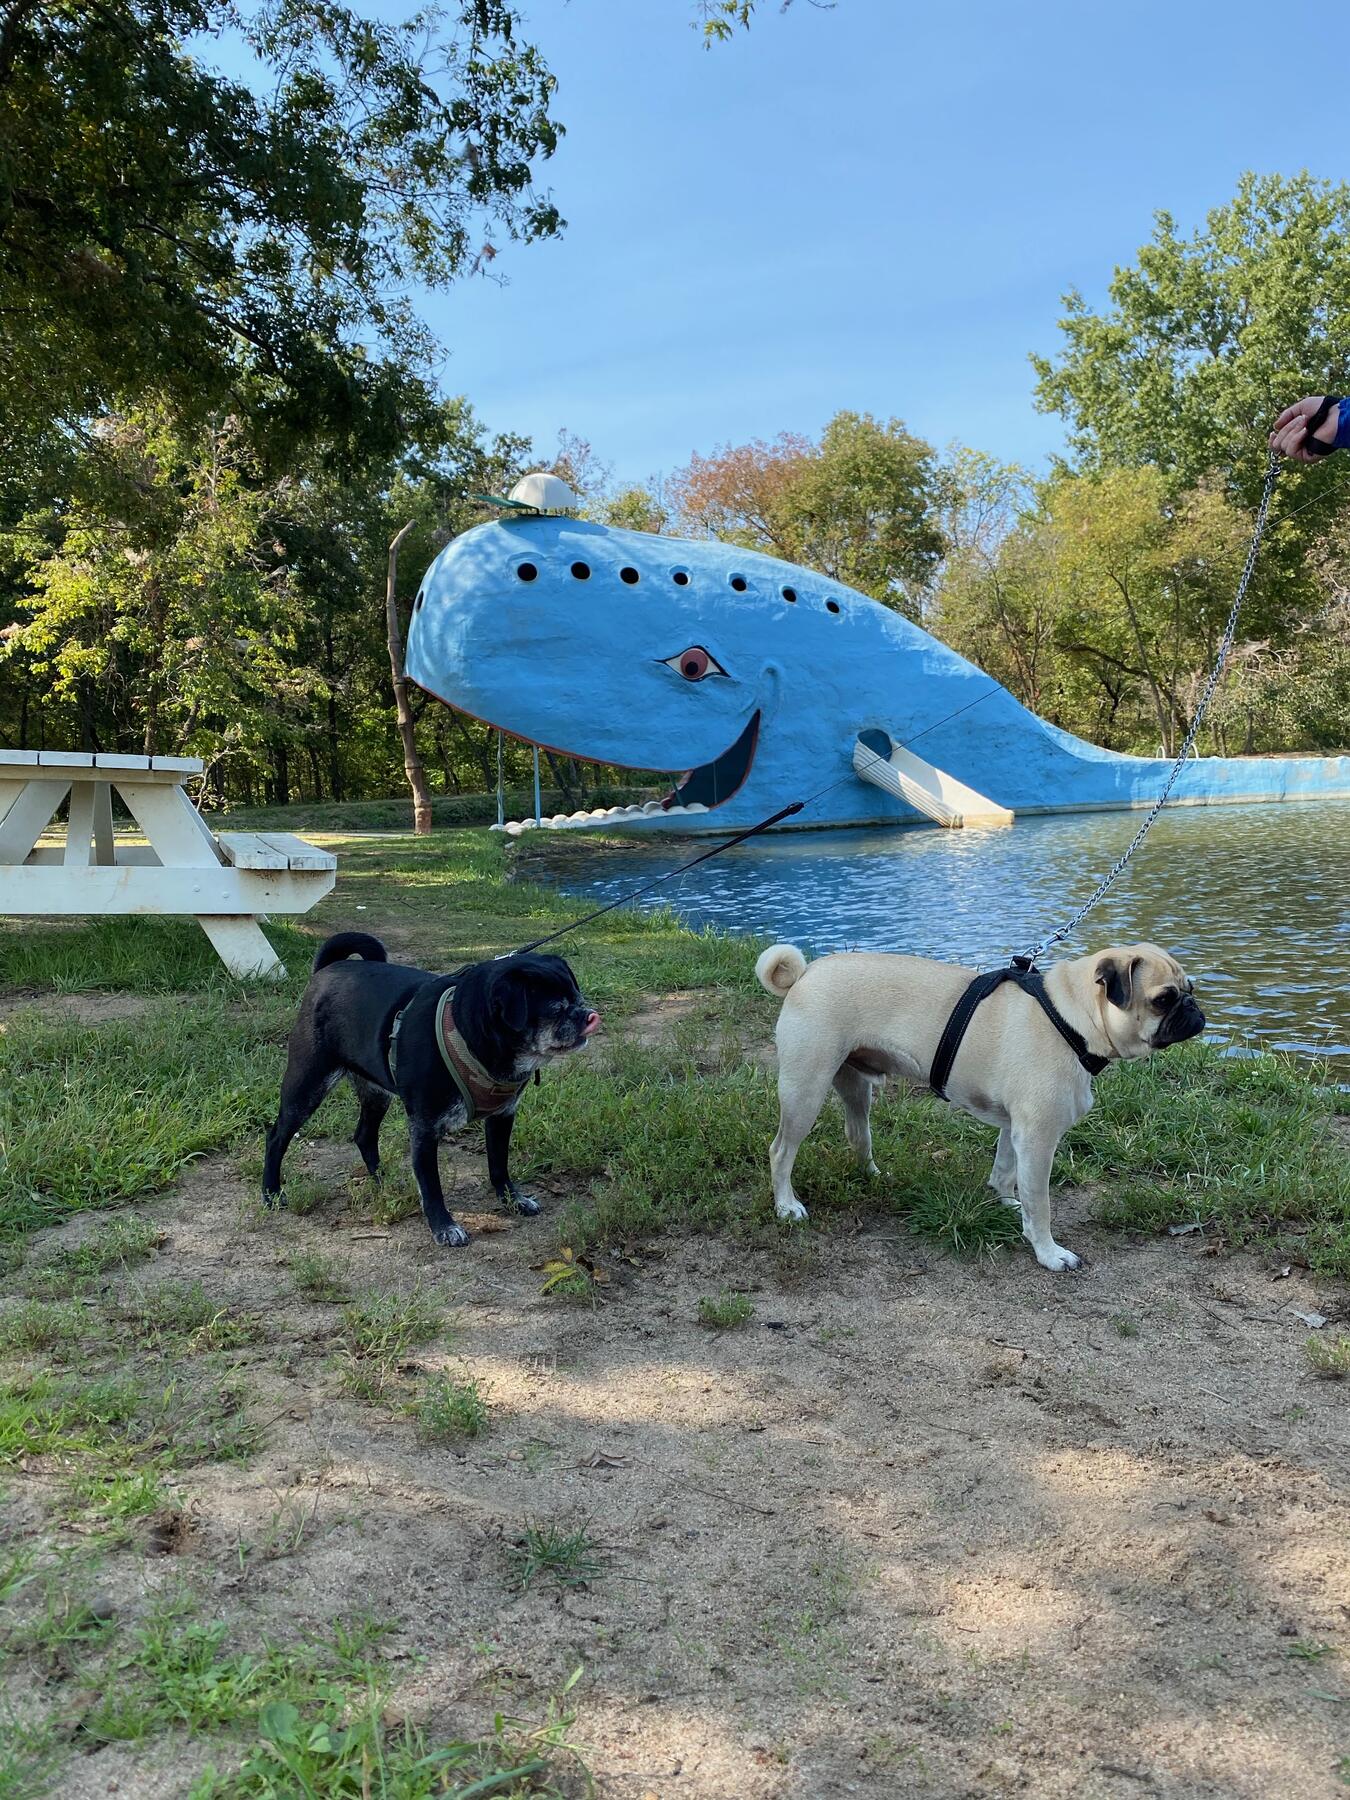 Teddy and Bear at The Blue Whale of Catoosa in Oklahoma